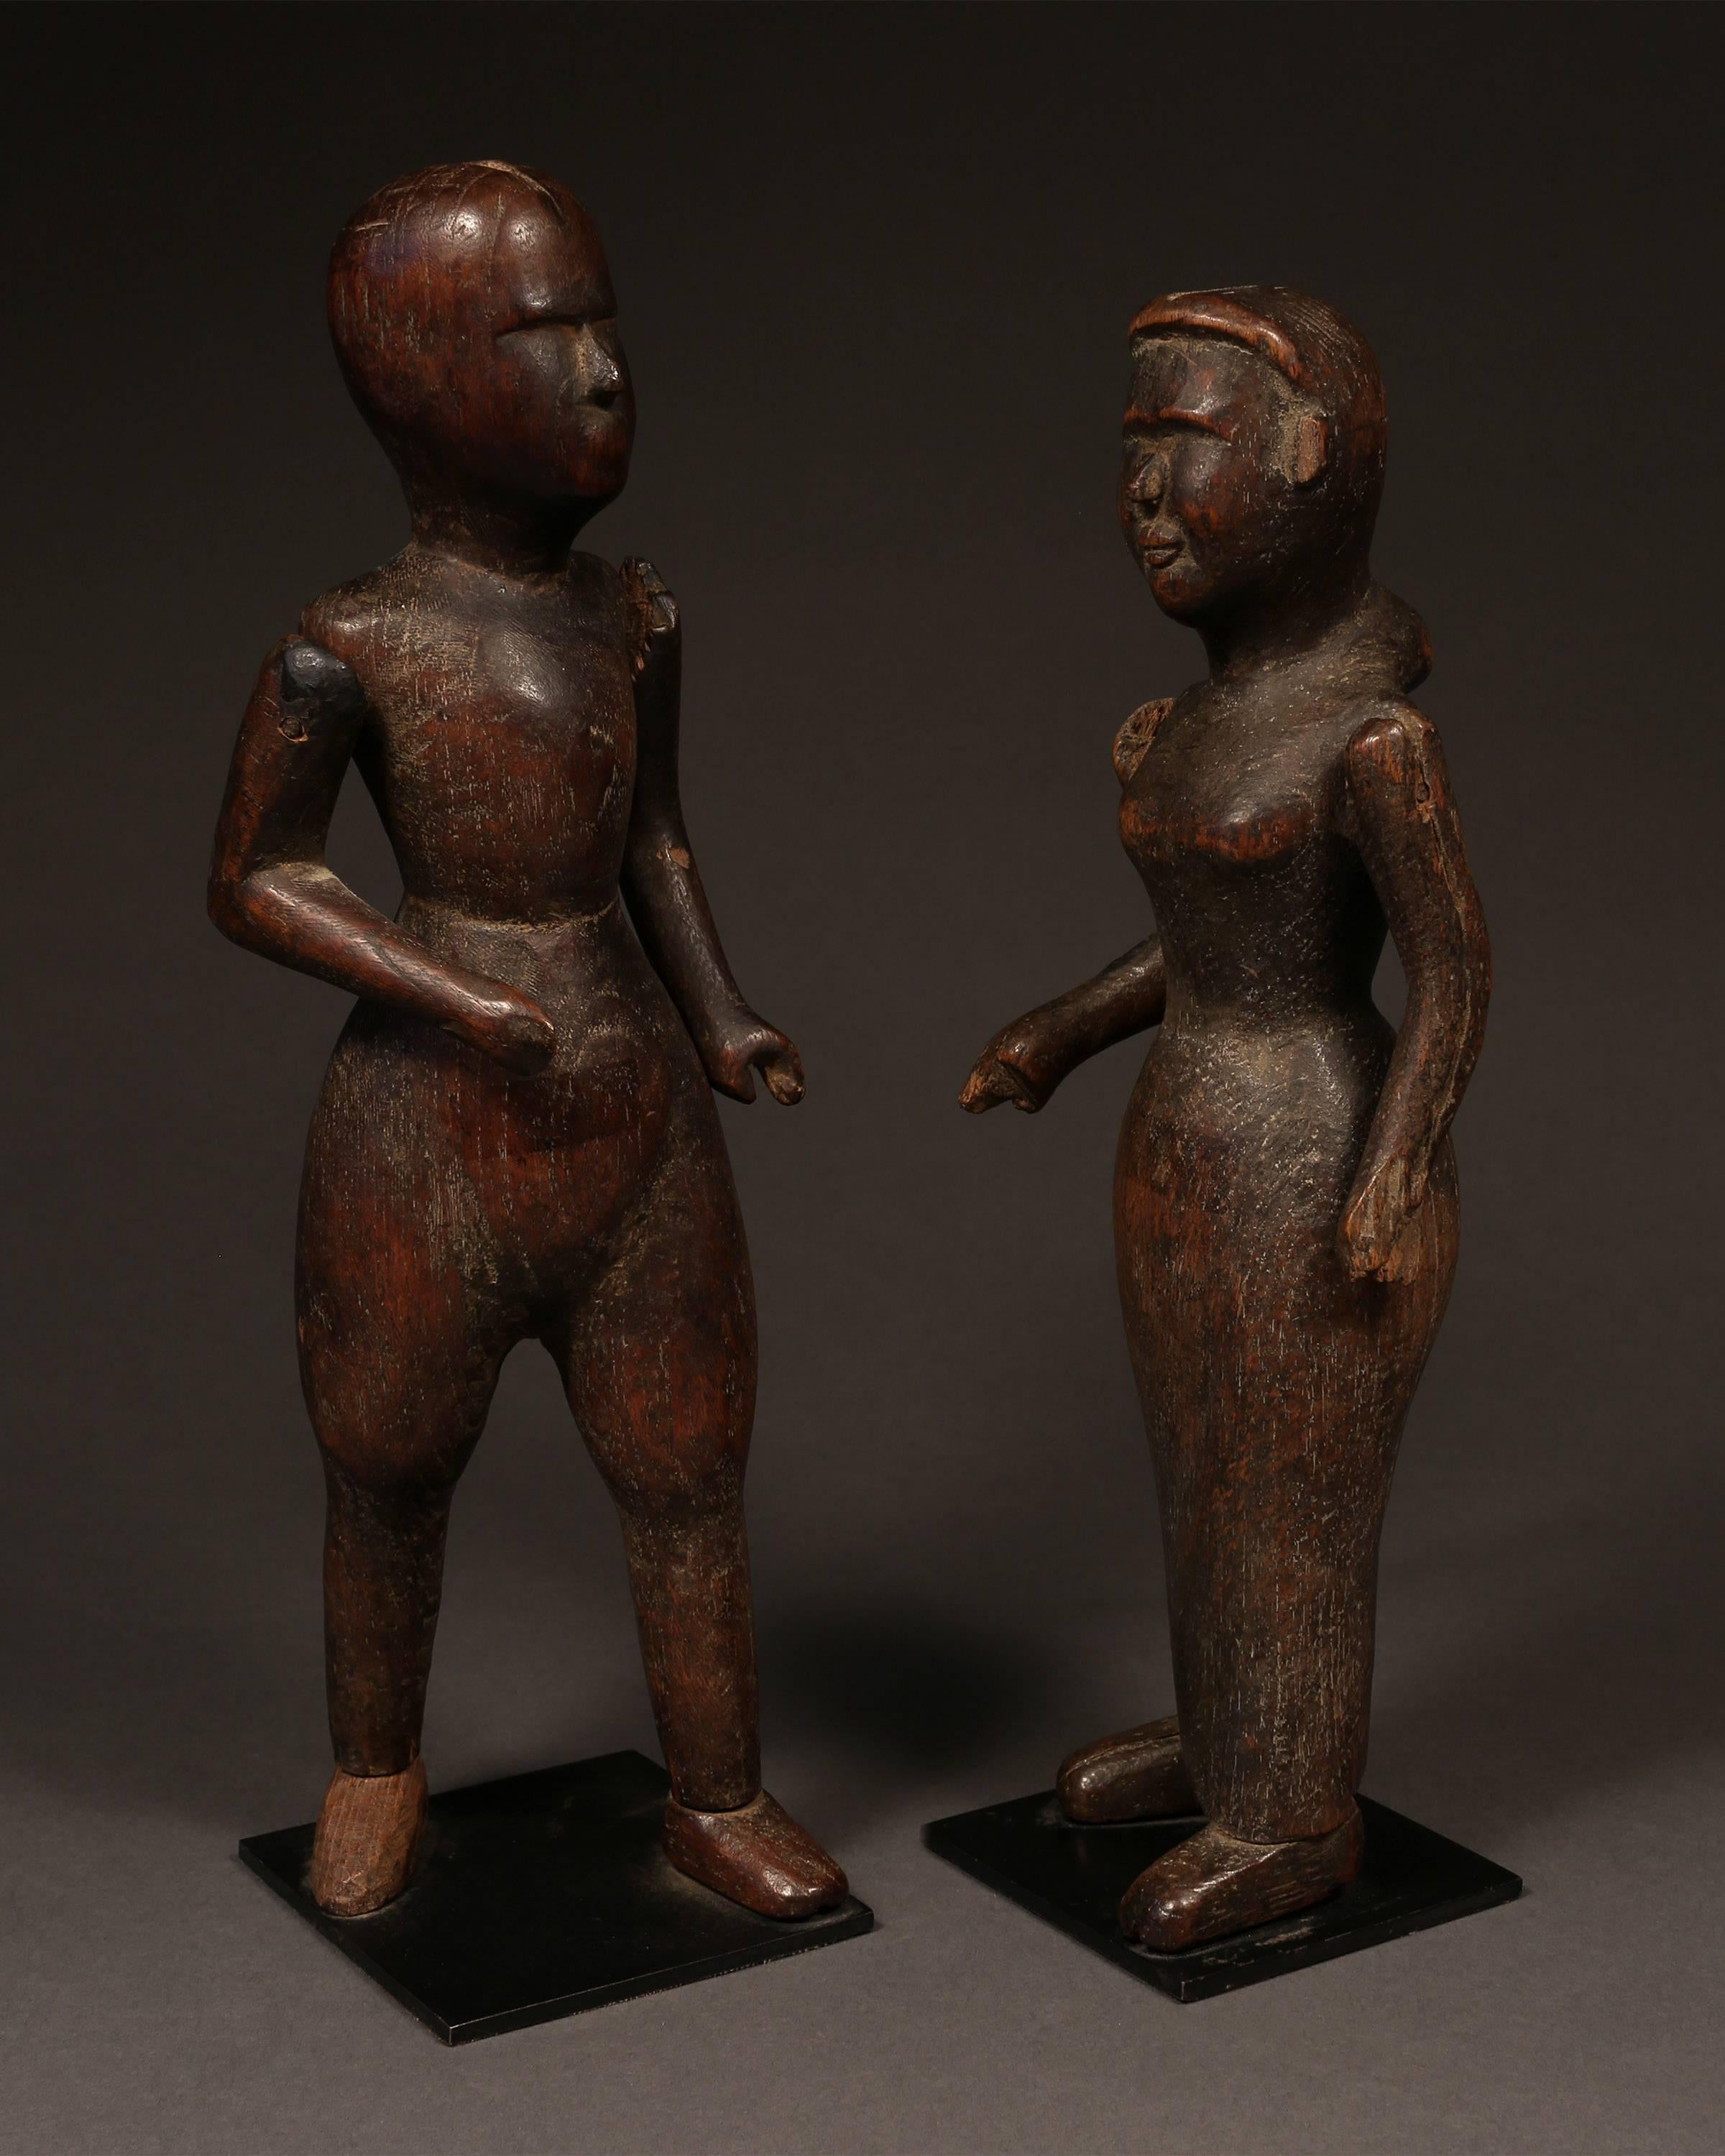 Puppet doll molds from Burma, early 20th century
The enigmatic faces of this unusual pair of standing figures express nobility and strength. The sculpted, articulated doll molds were covered with papier-mâché to fabricate toy puppets.